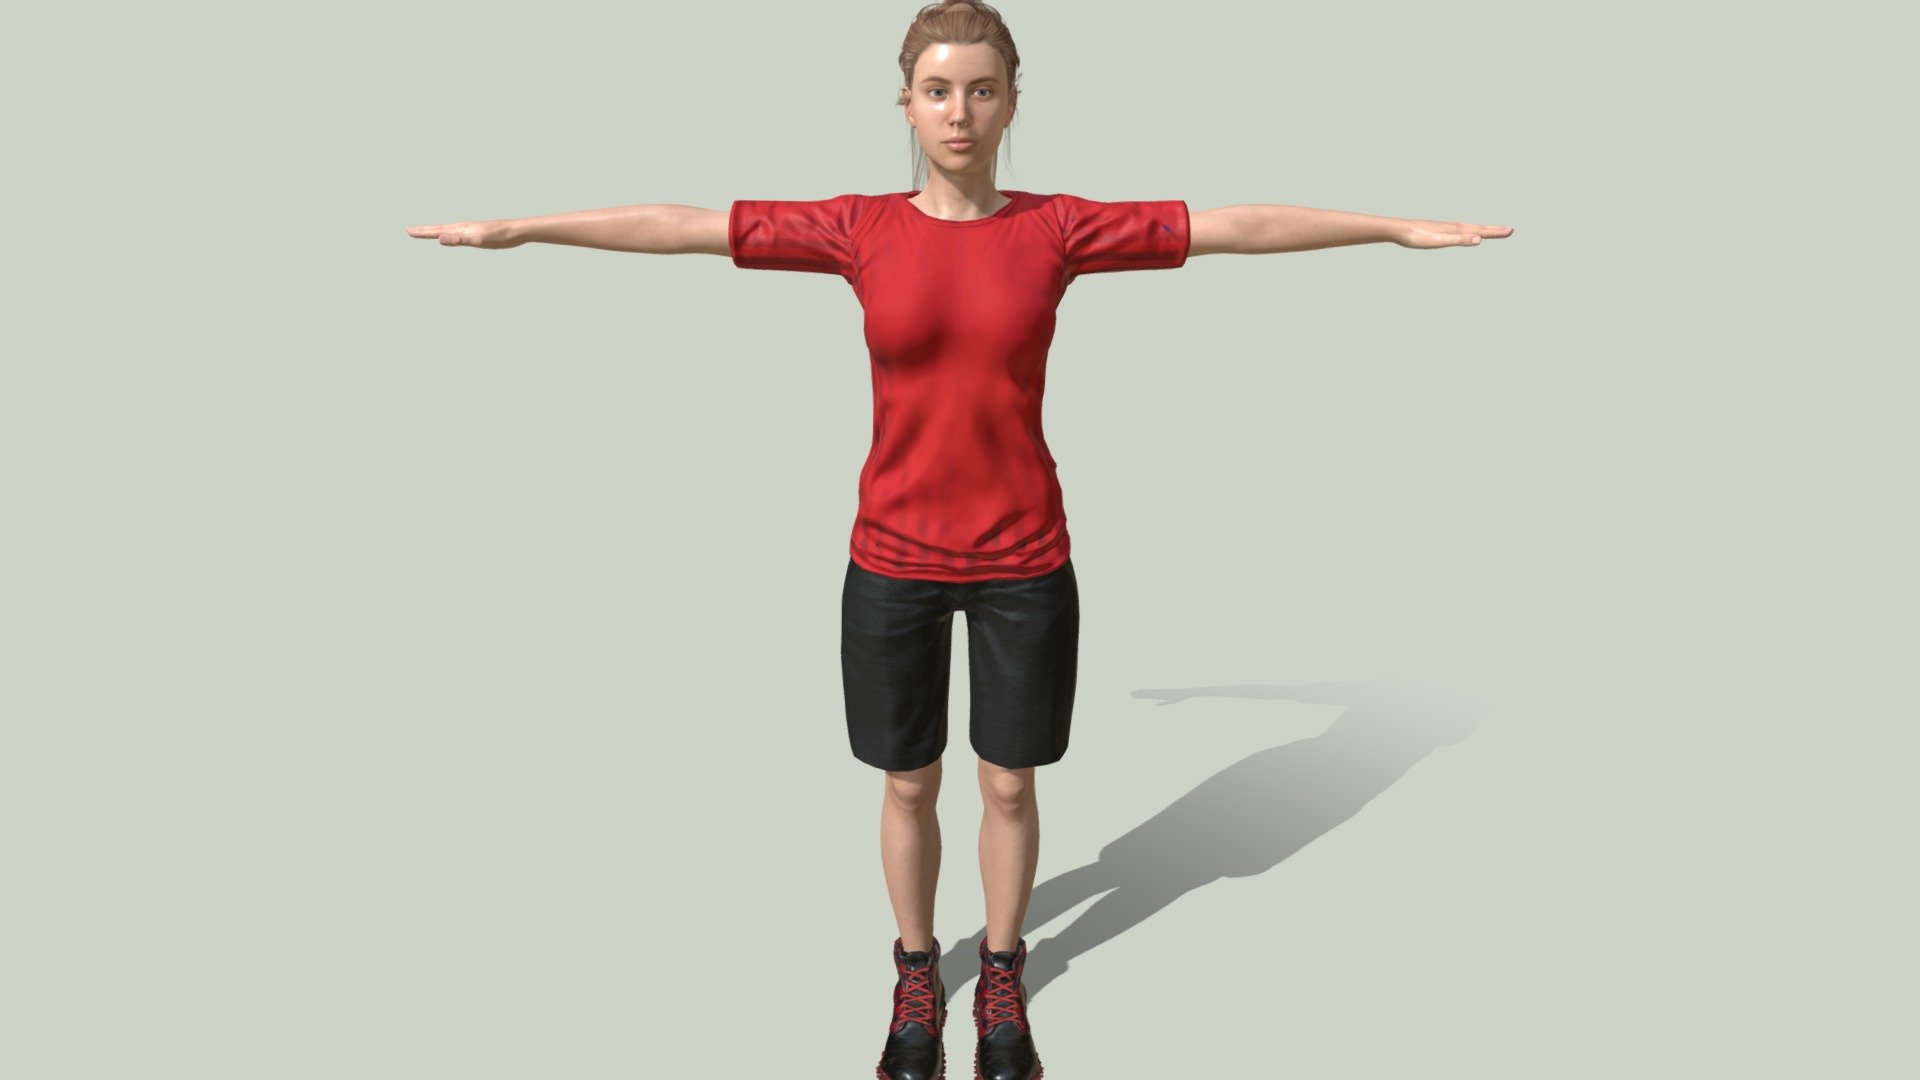 Female Player with her uniform ready for play - 3d Model character creator - Female Player - 3D model by RiverofCreative 3d model